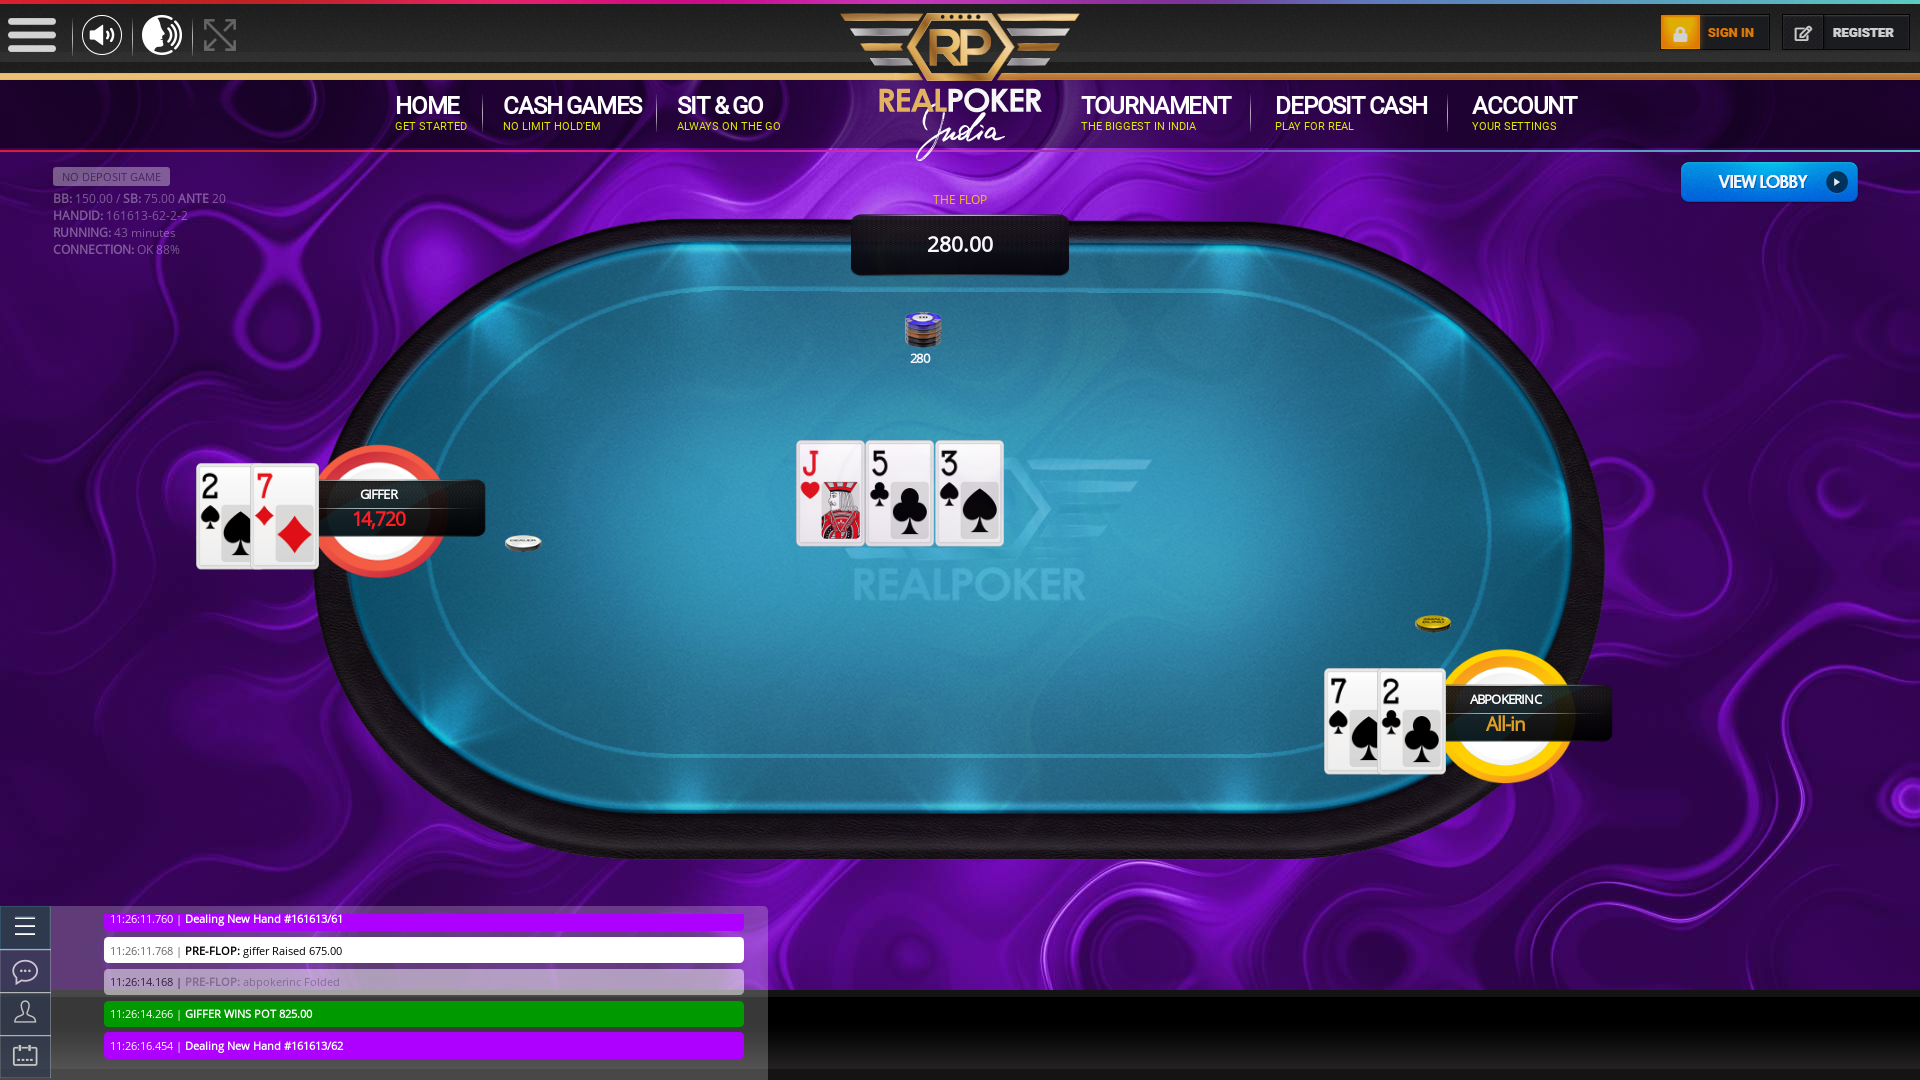 Indian poker on a 10 player table in the 43rd minute